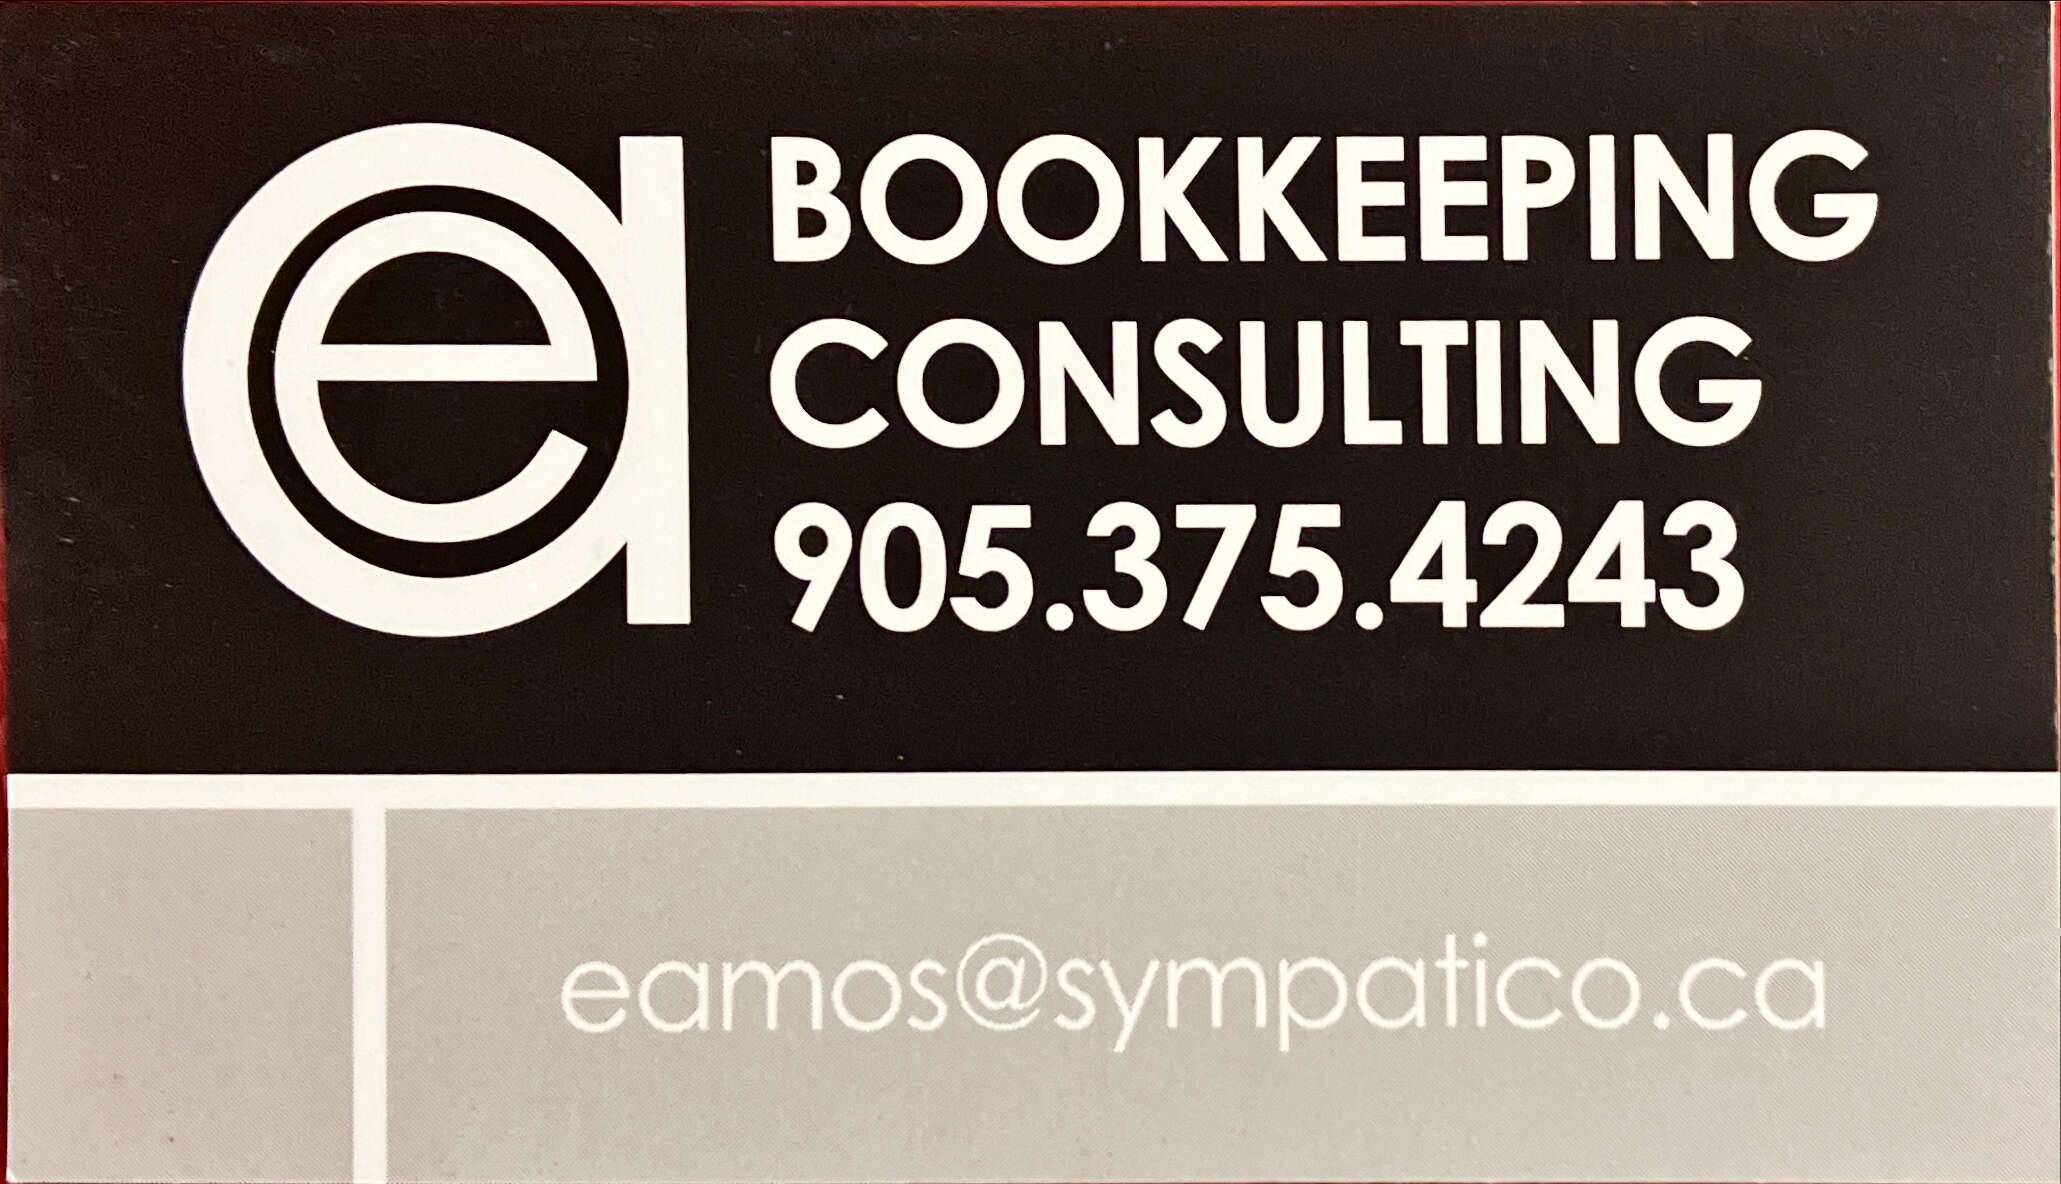 Bookkeeping Consulting